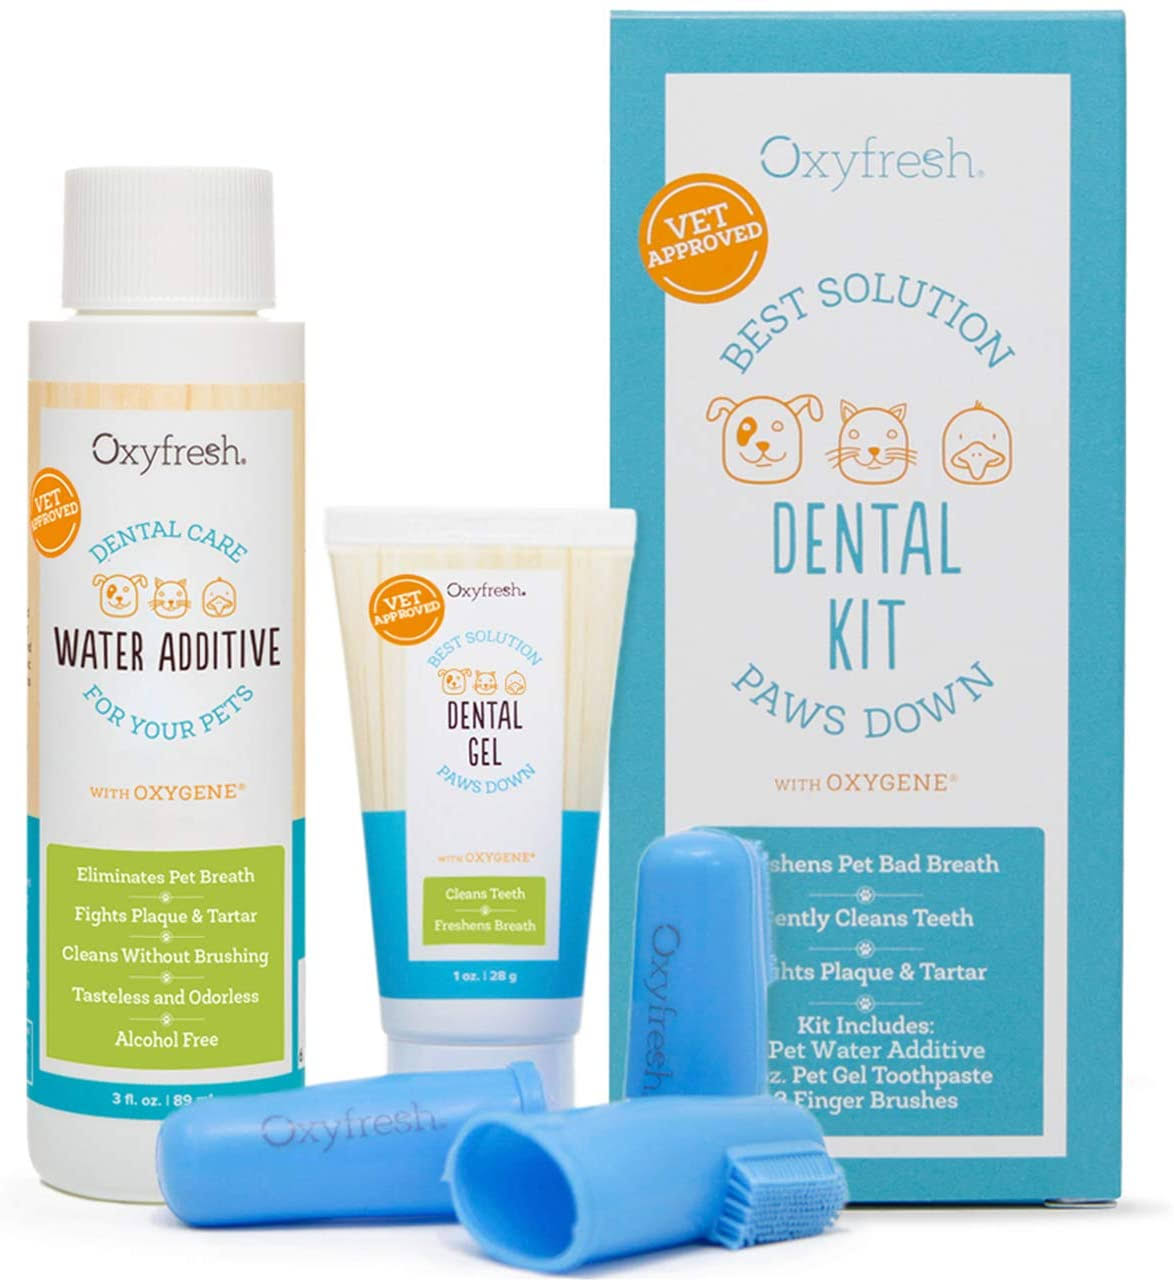 Oxyfresh Premium Pet Dental Kit for Dogs and Cats Easy Pet Fresh